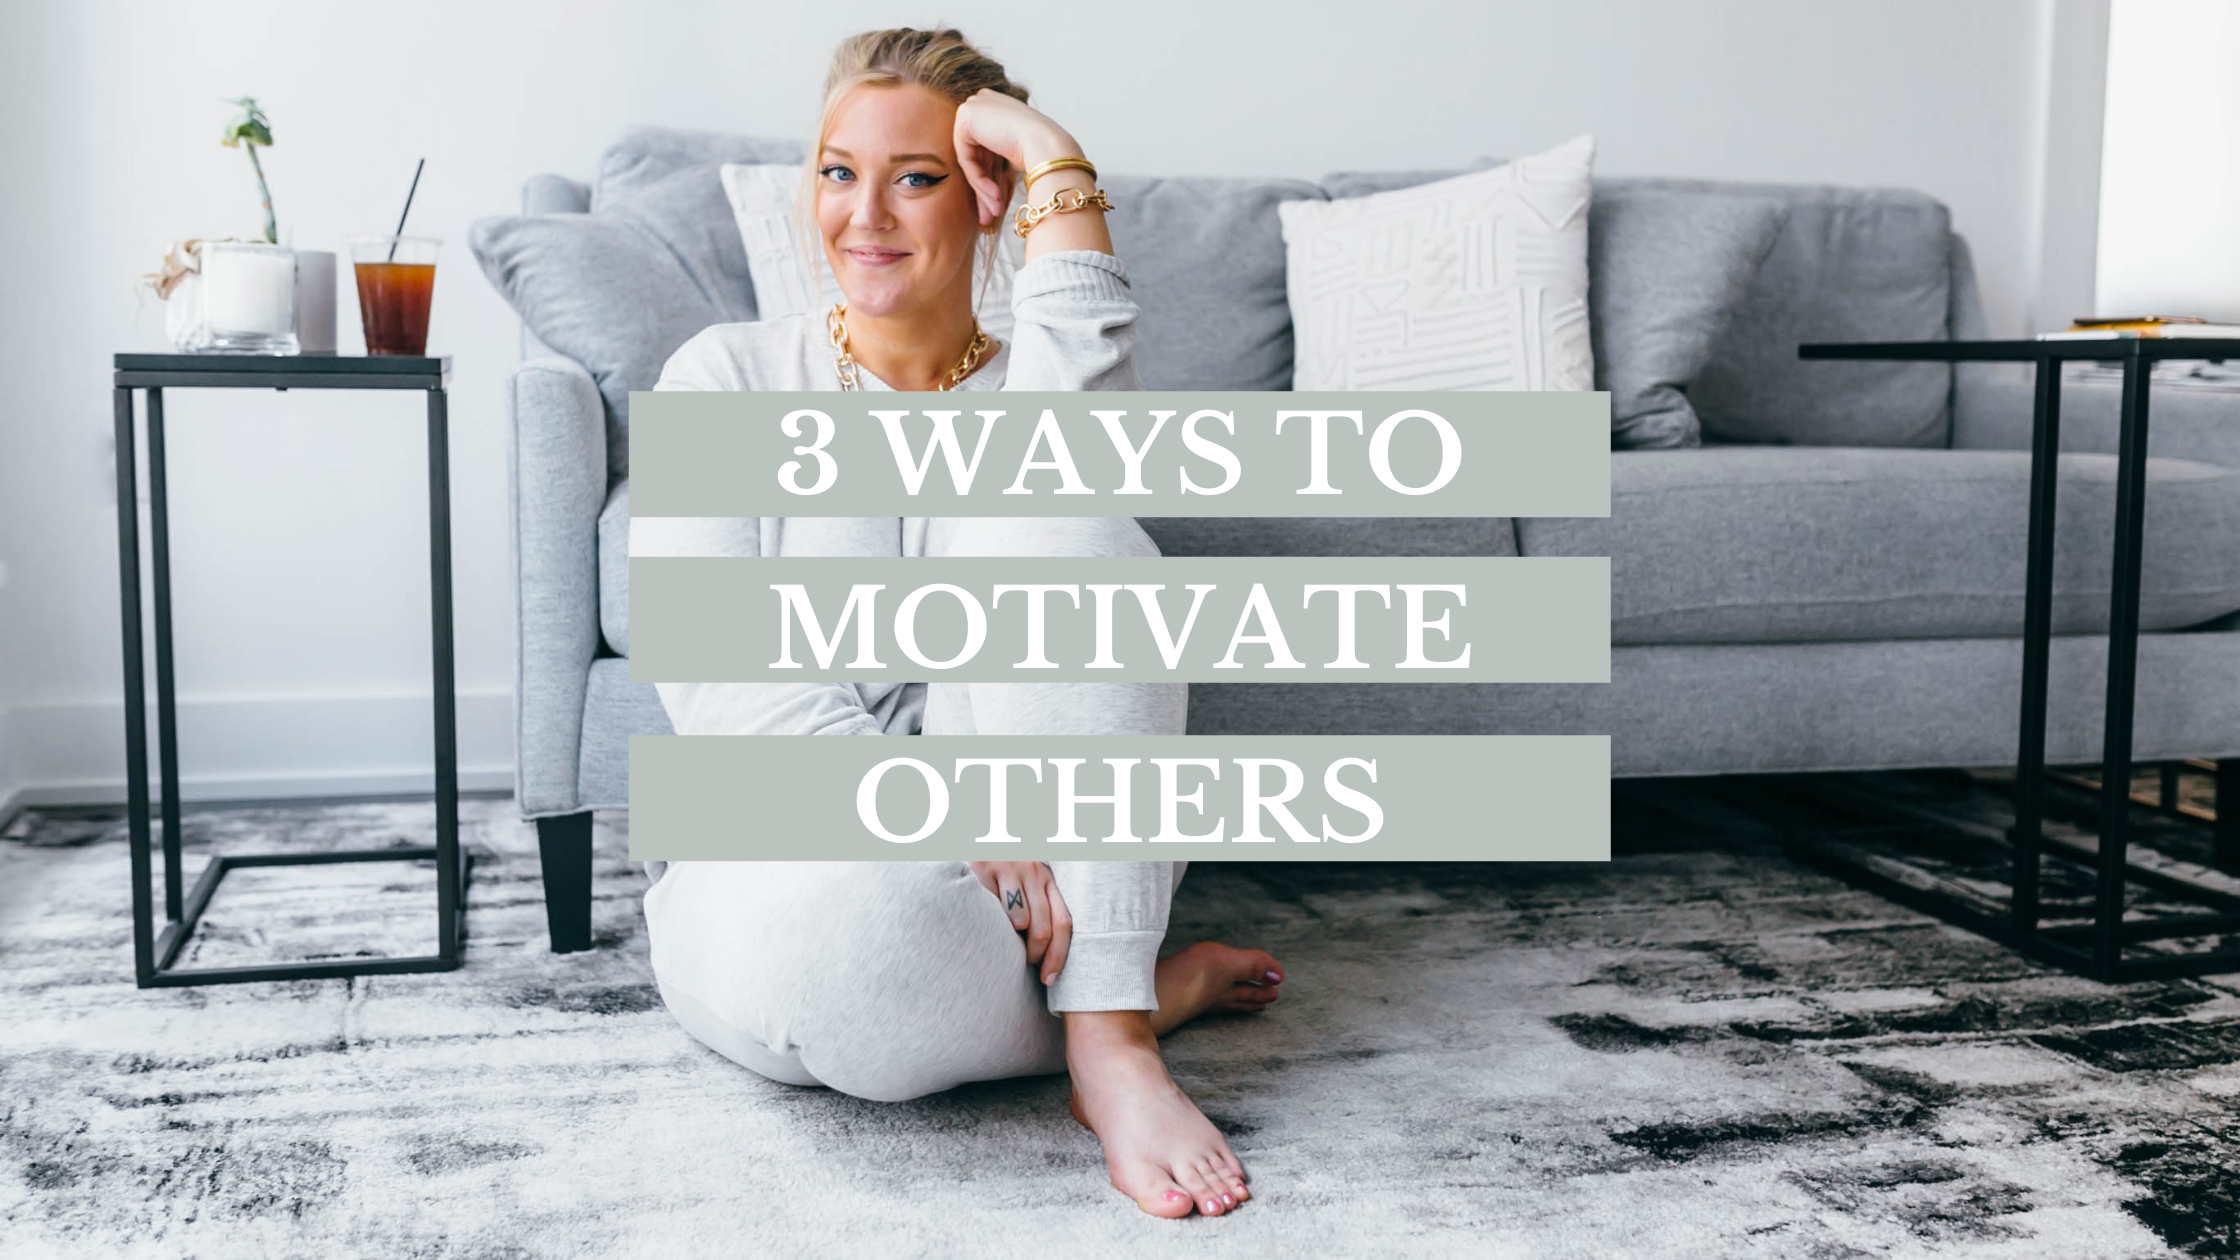 laura-weldy-three-ways-to-motivate-others-in-the-workplace.png